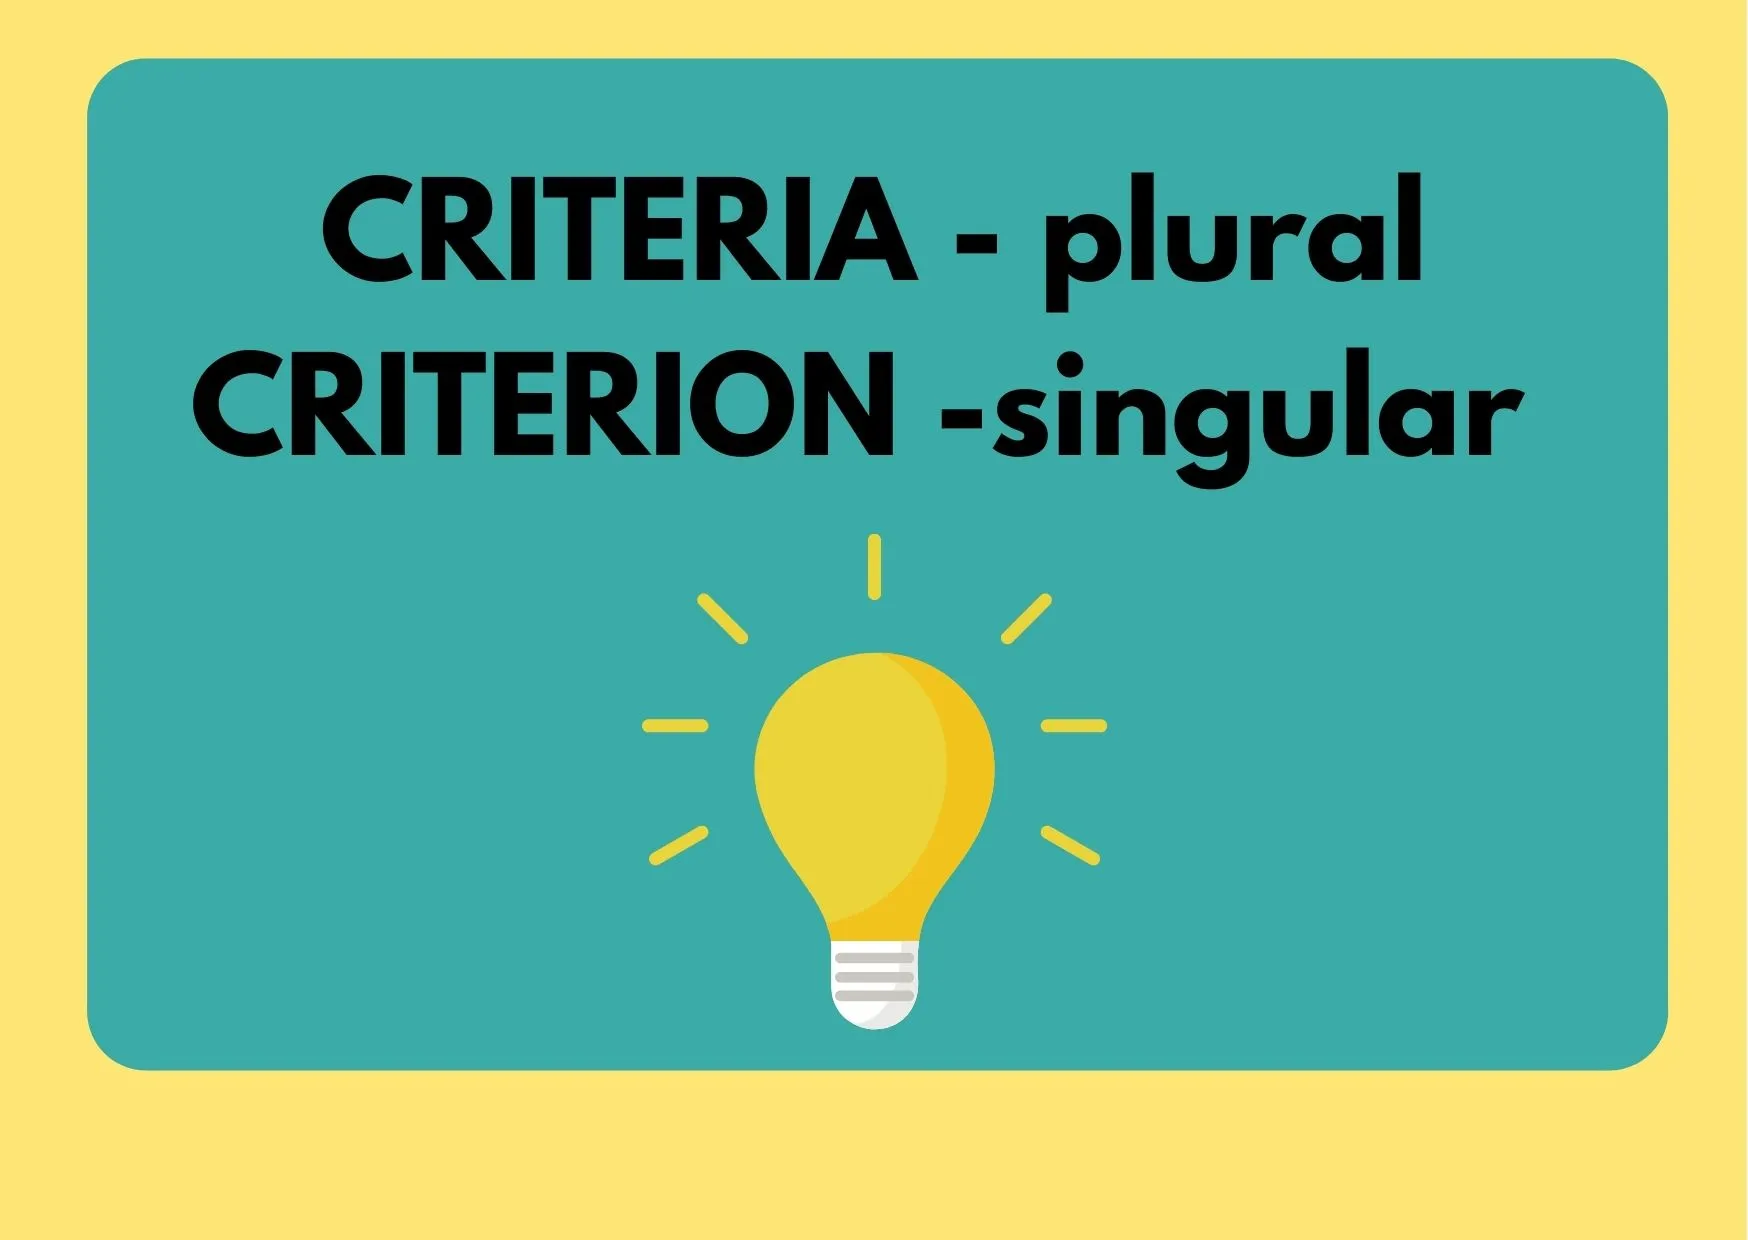 A lightbulb and the text "Criteria - plural, Criterion - singular"